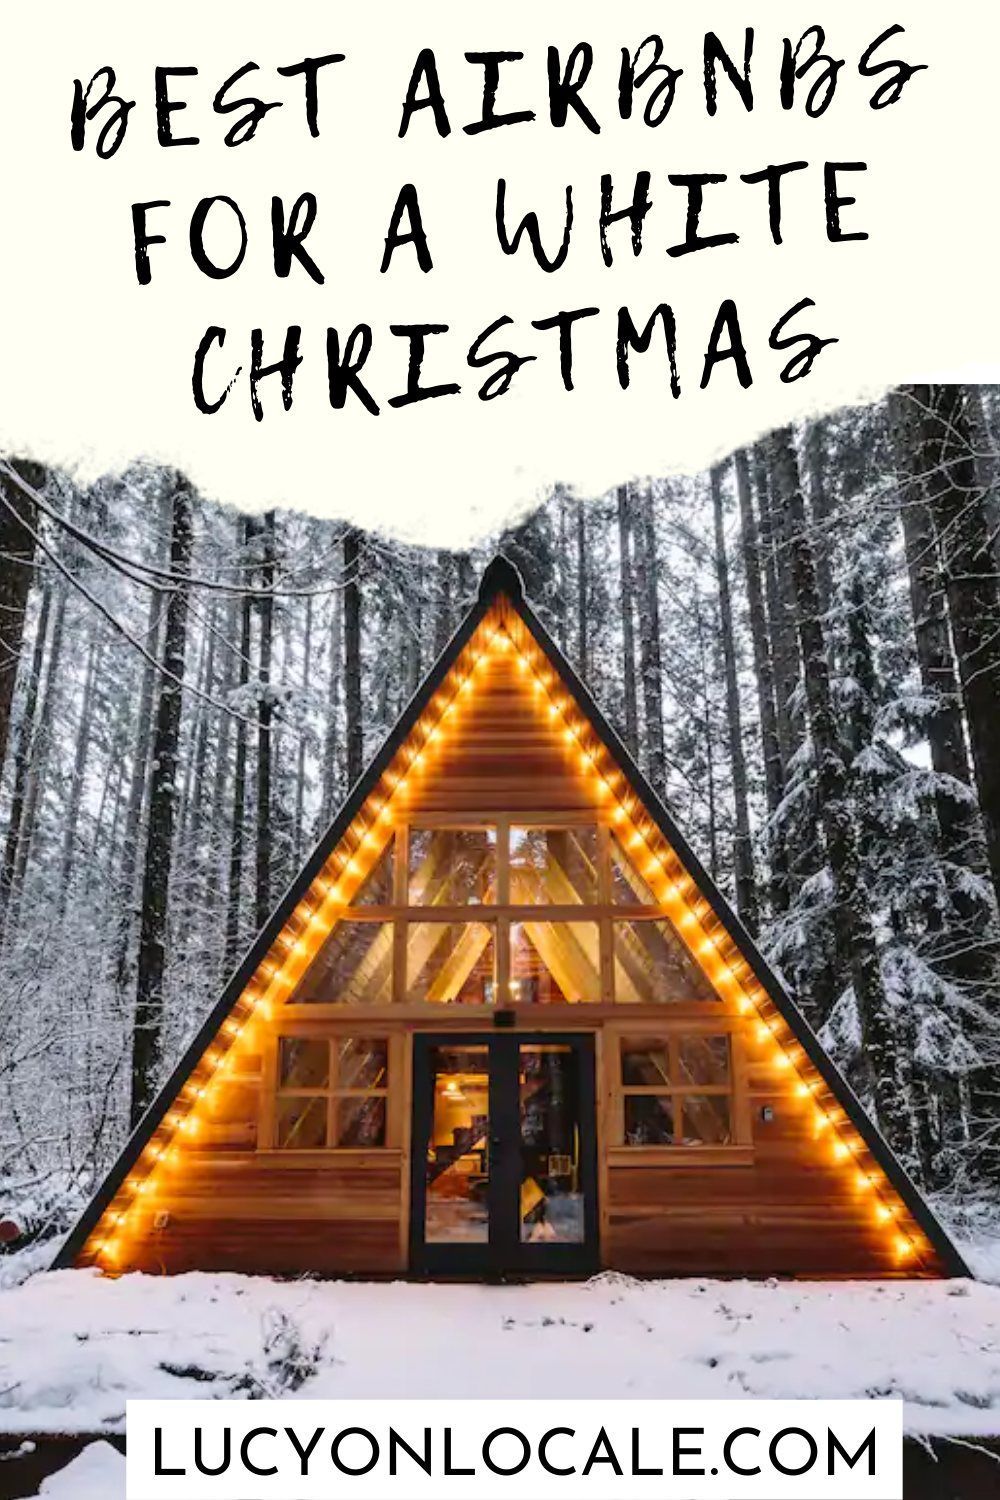 Airbnbs for a white Christmas in the U.S.